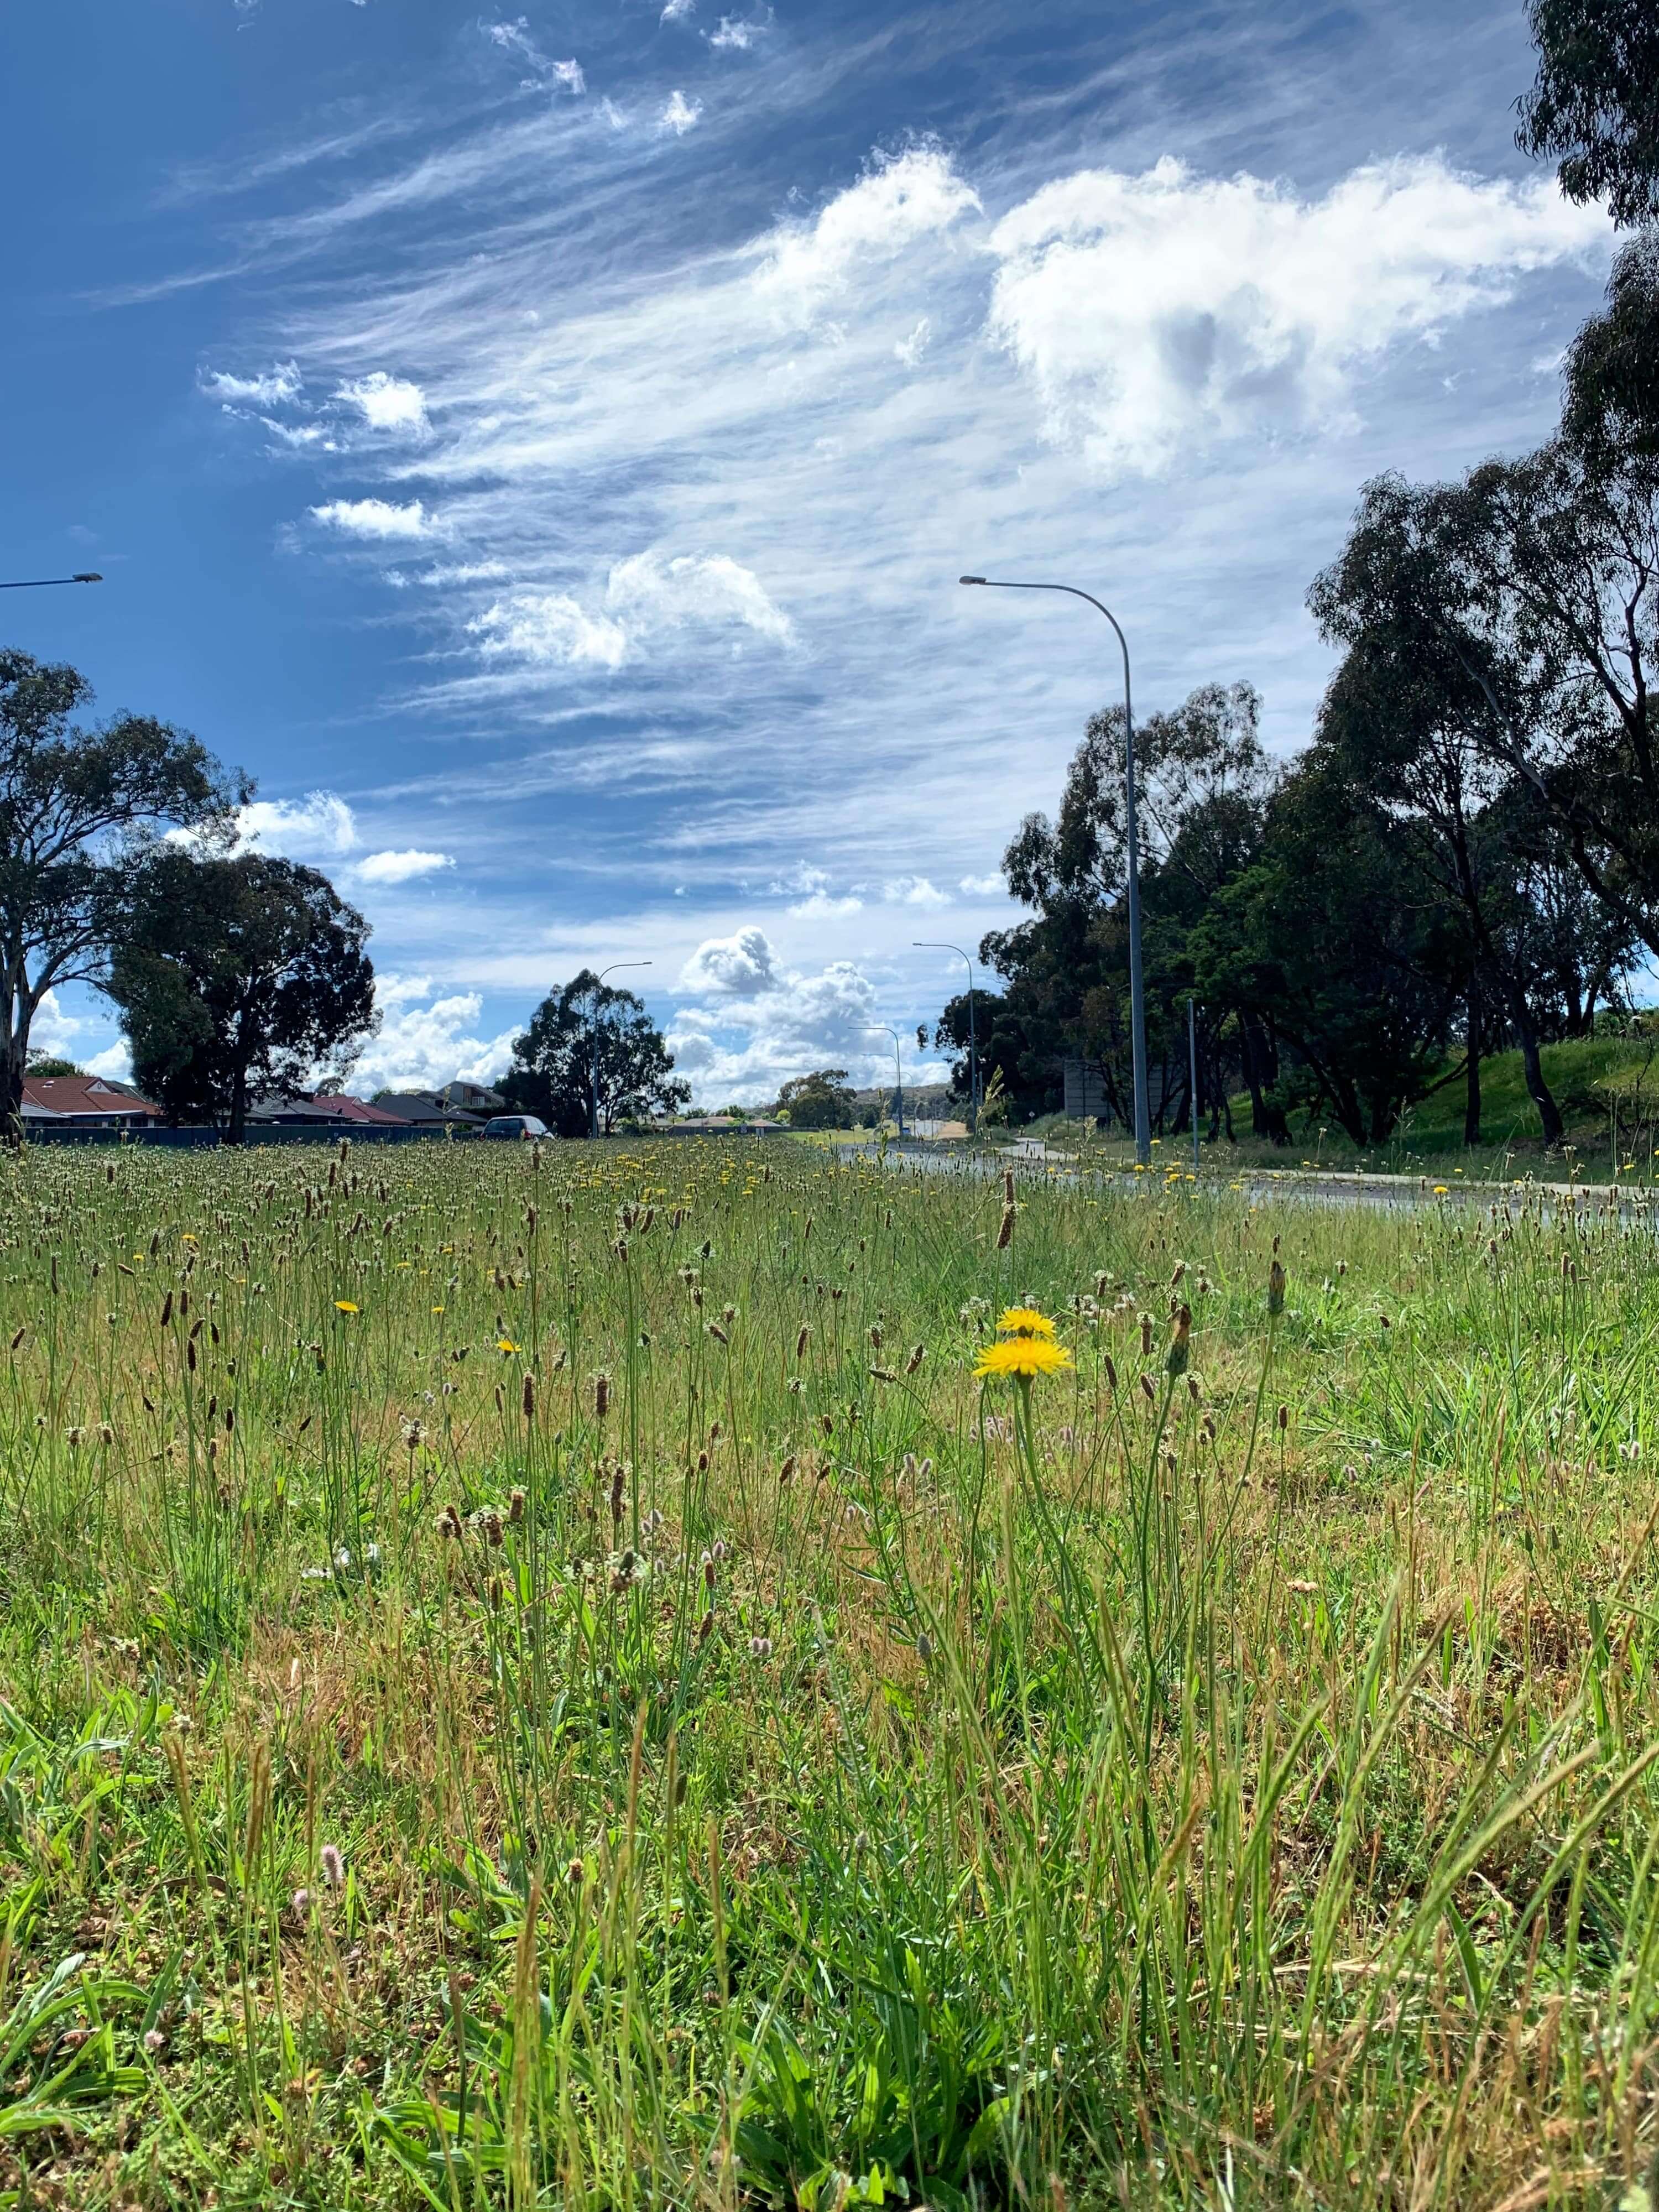 photo of a dandelion shrub in a green valley near a major, yet empty roadway